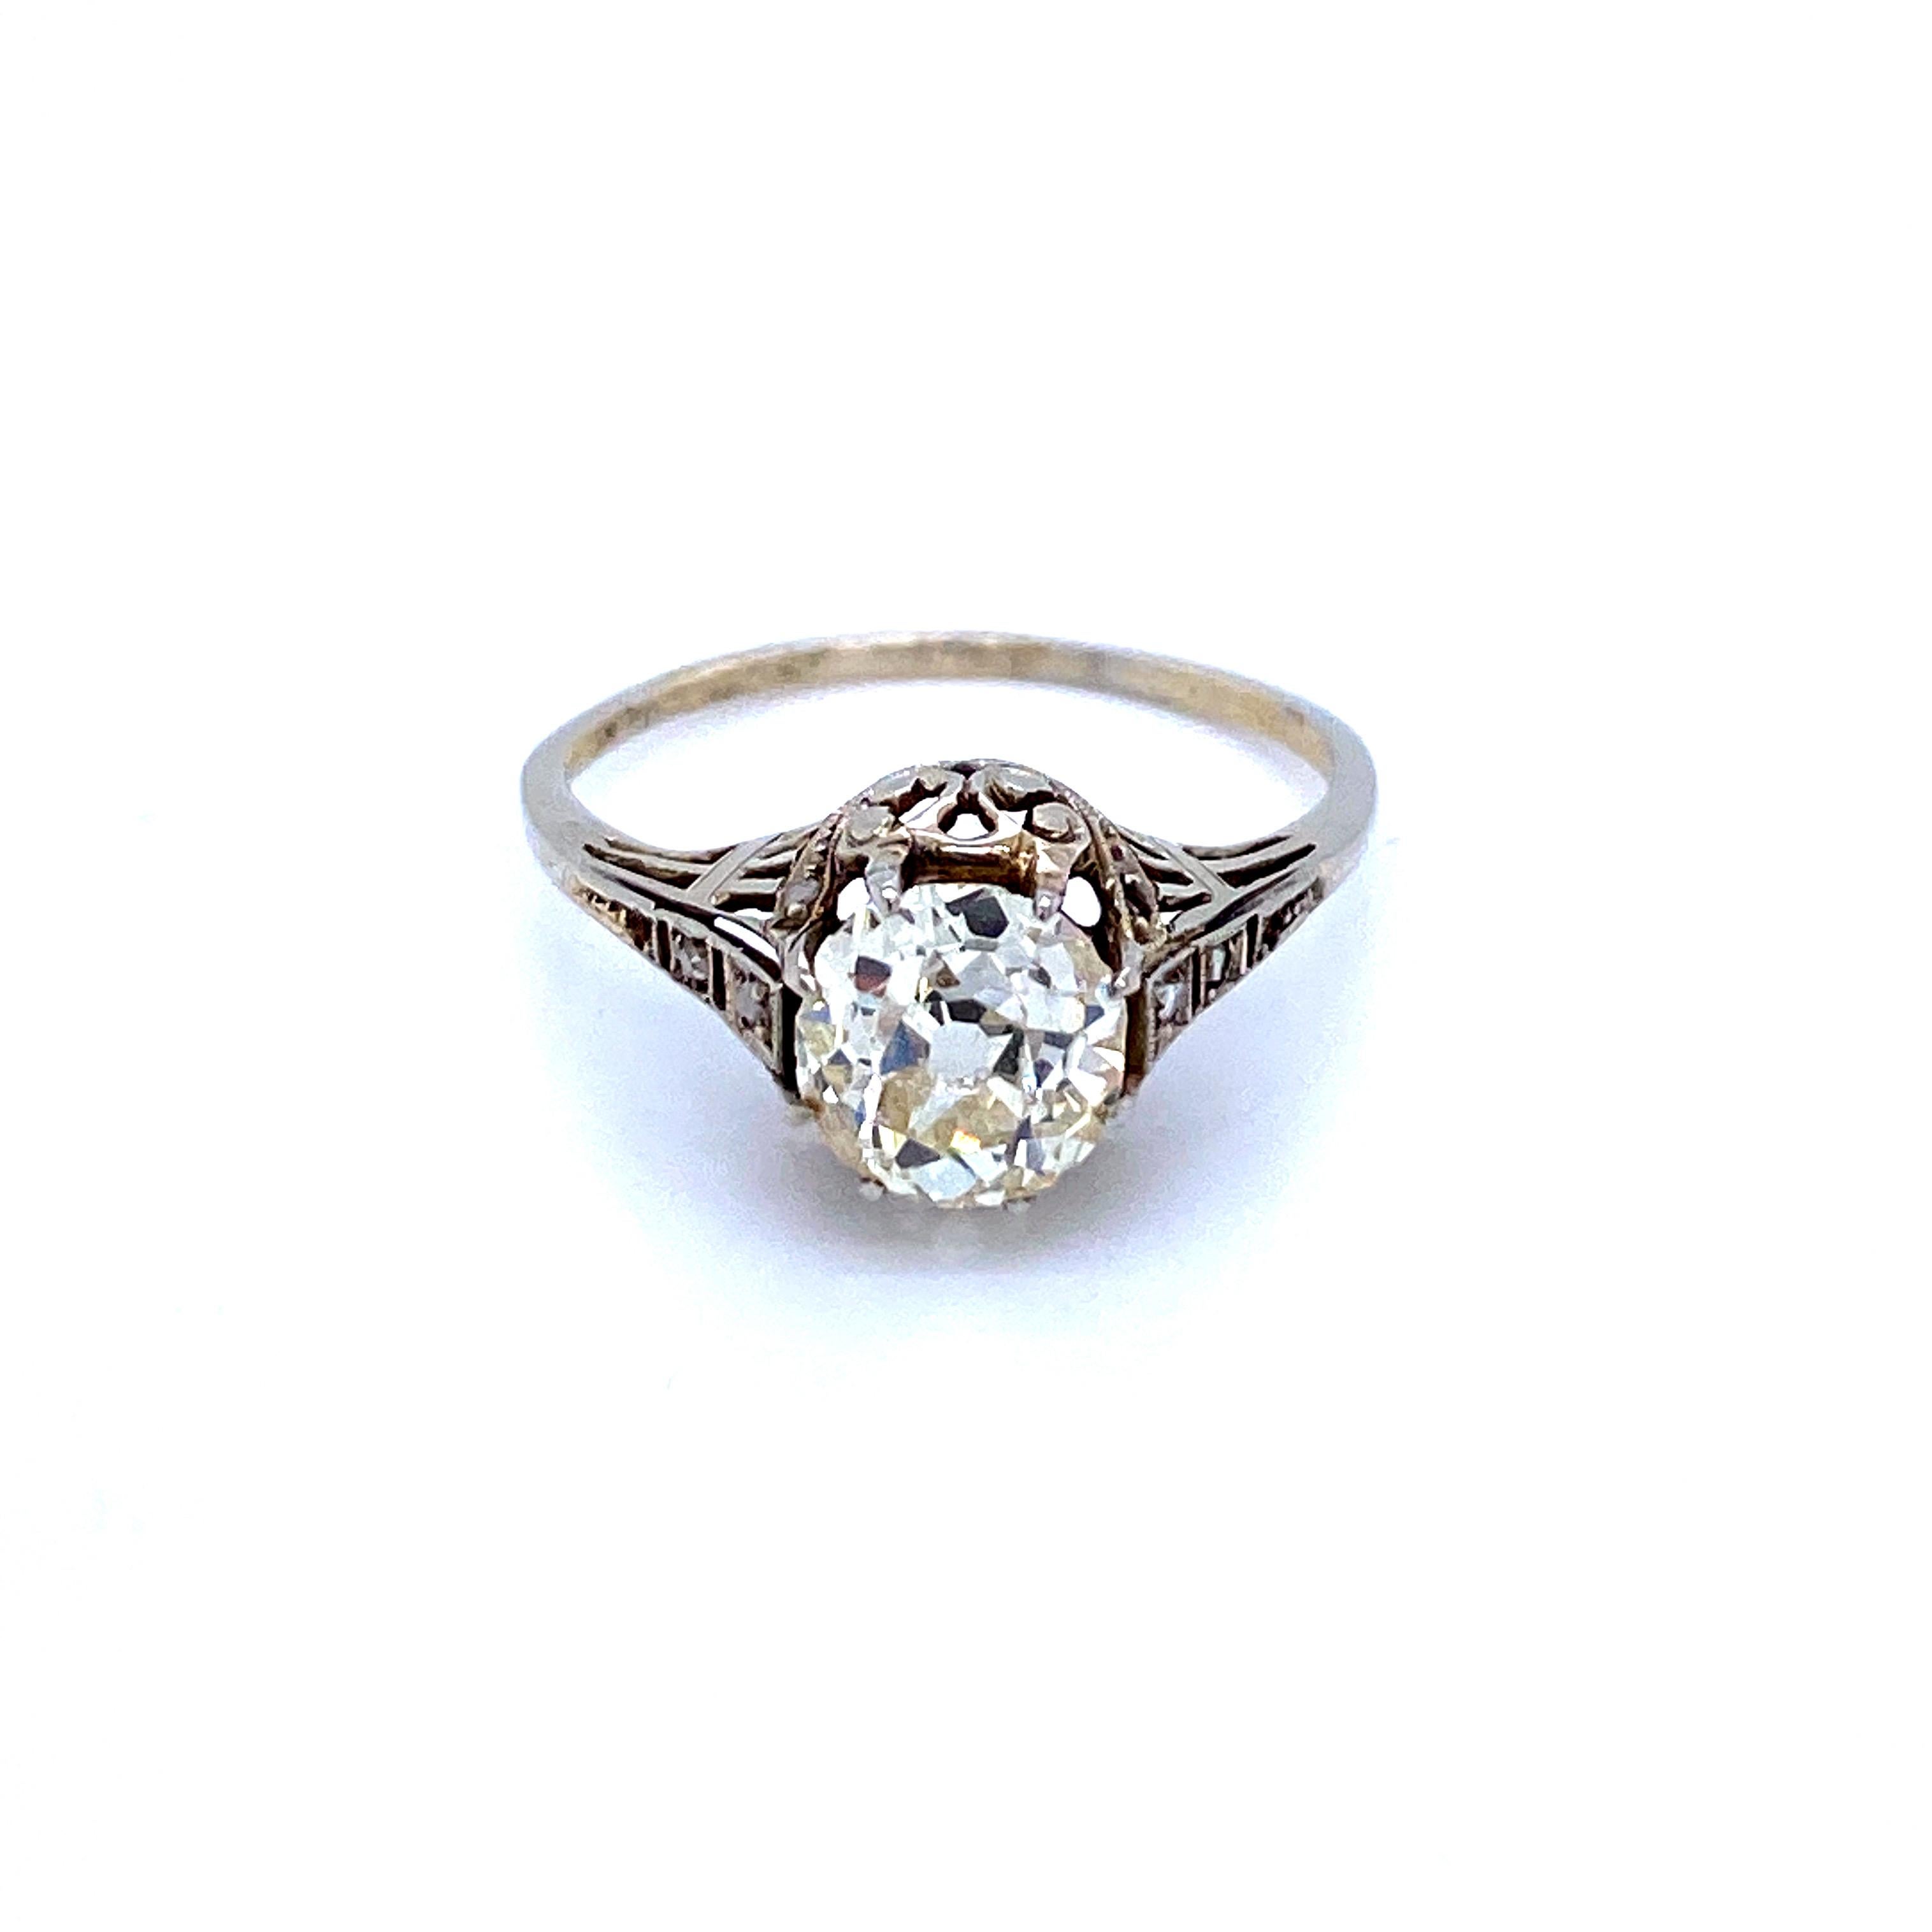  This stunning antique solitaire engagement ring set in 18k white gold is centered with a prominent old-mine cut diamond of 1.40 ct, K color and SI2 clarity. 
The pierced decorated shoulders are embellished with a textured design and small rose-cut